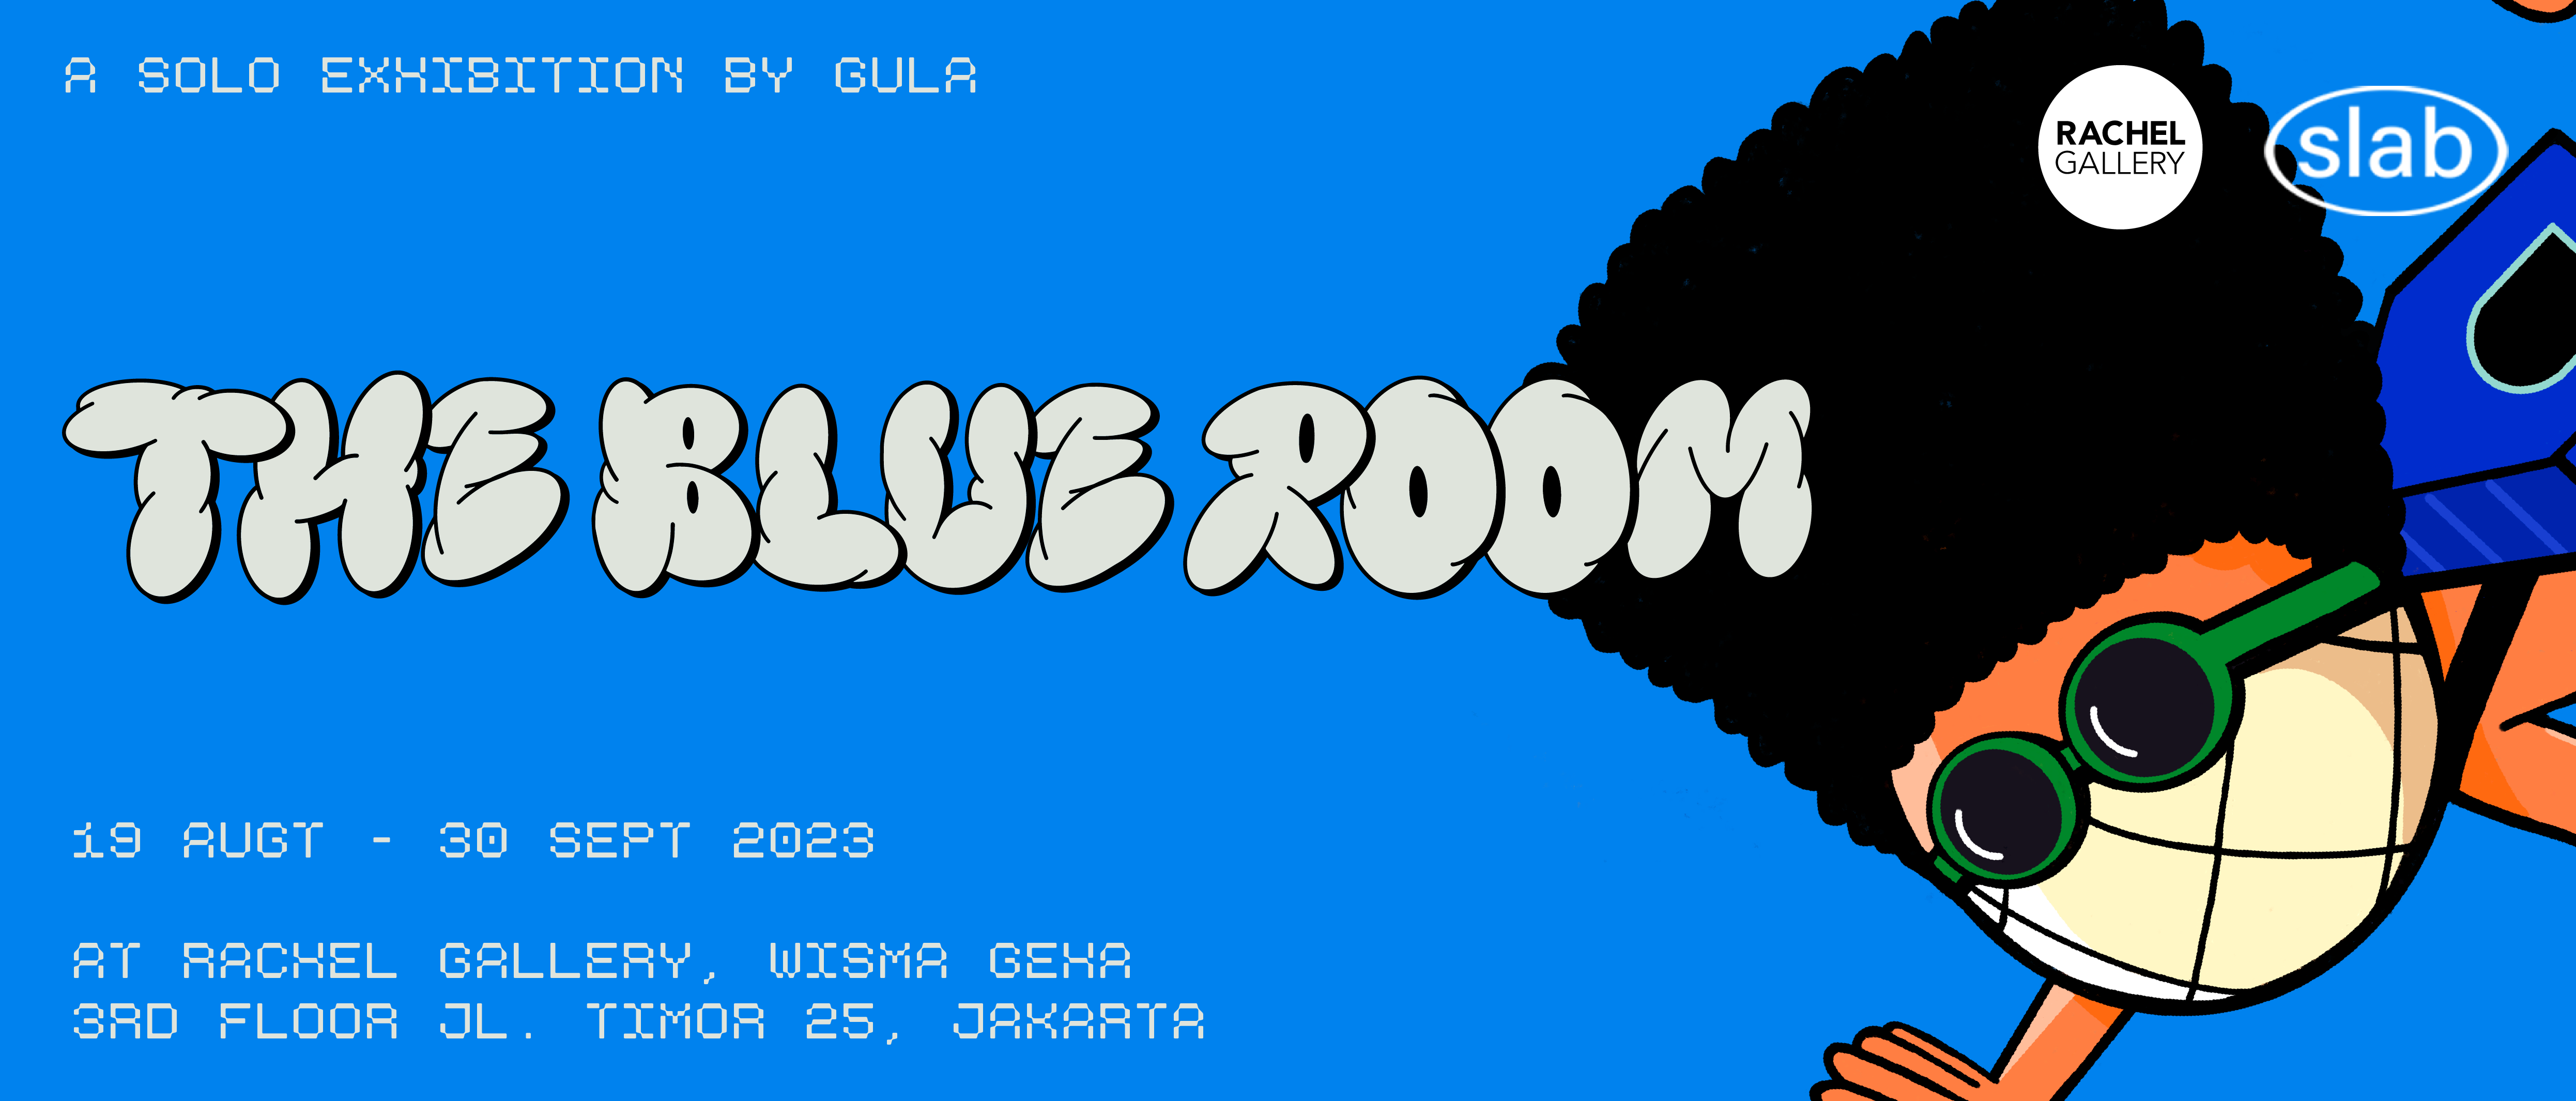 THE BLUE ROOM